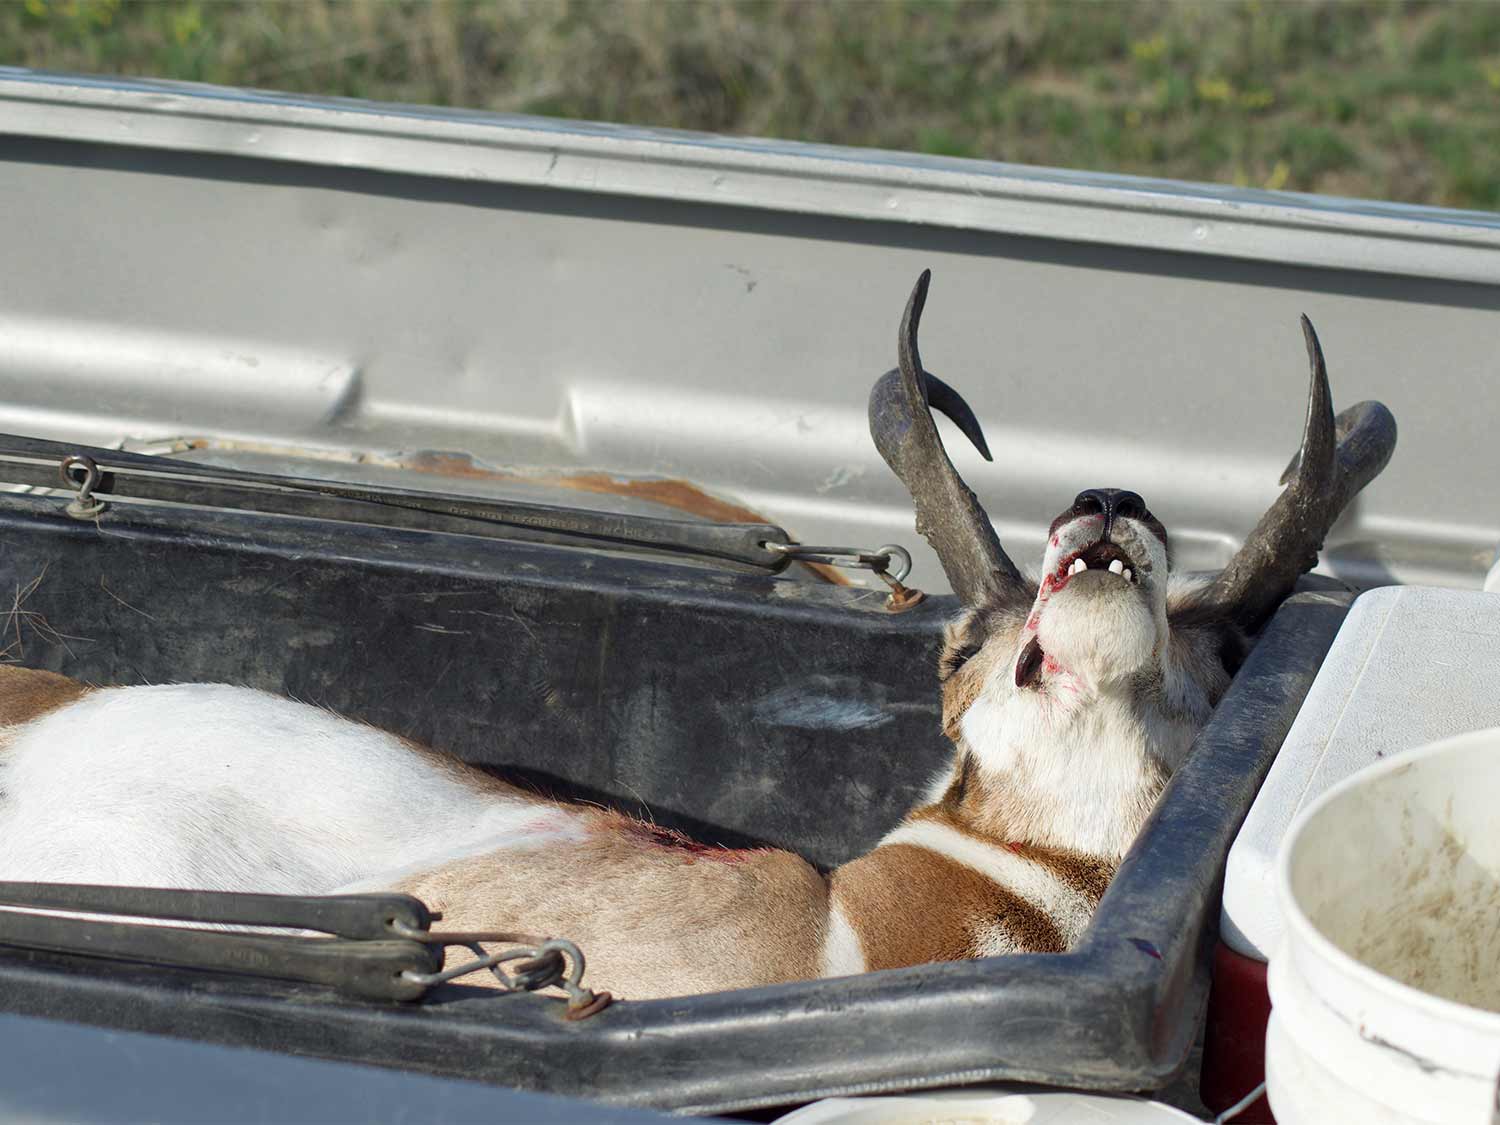 A pronghorn antelope in the back of a truck.